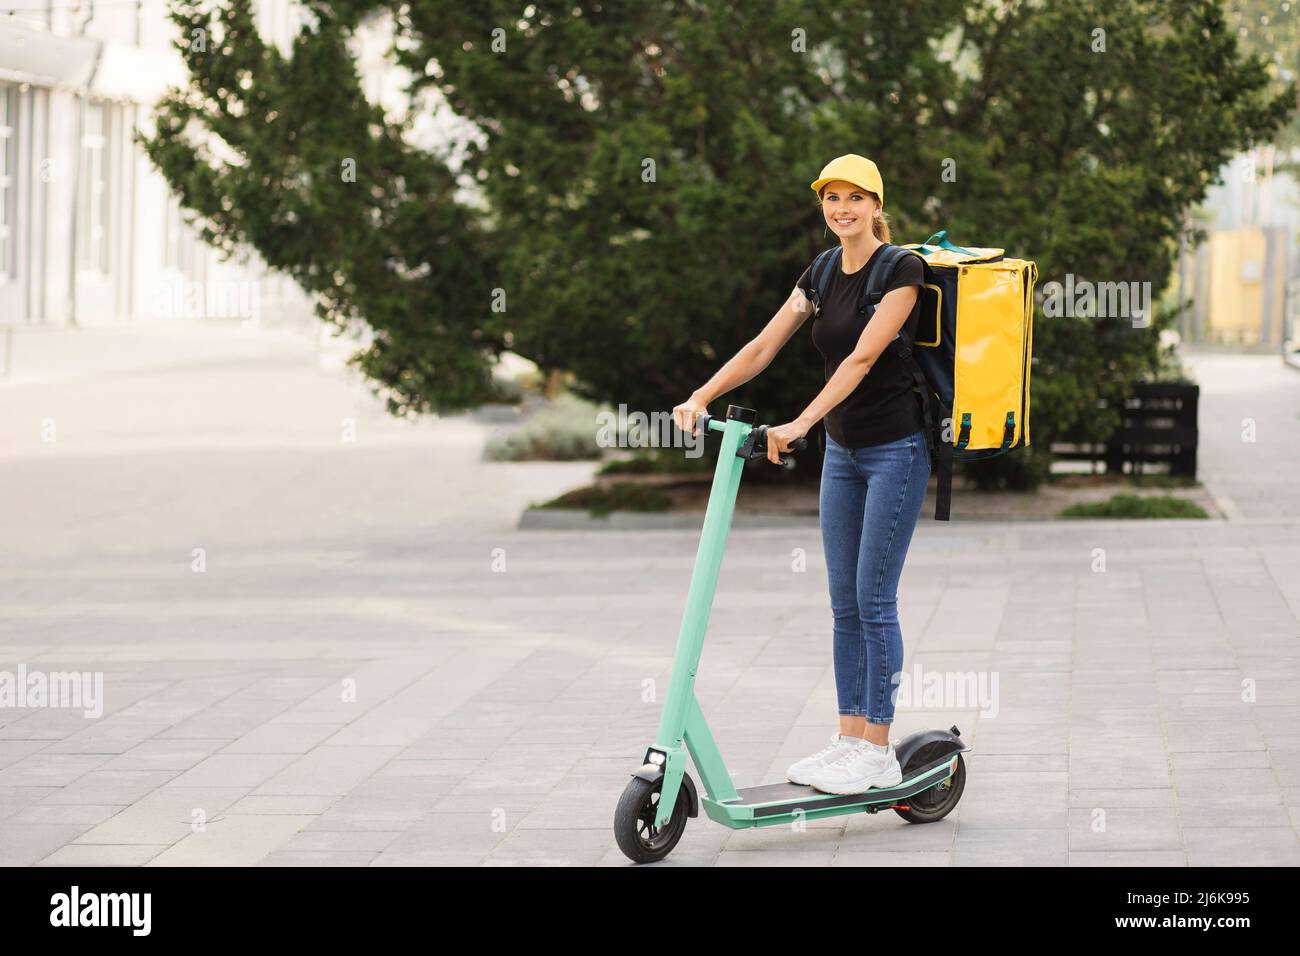 Beautiful young girl with a yellow bag on her back and cap riding an  electric scooter